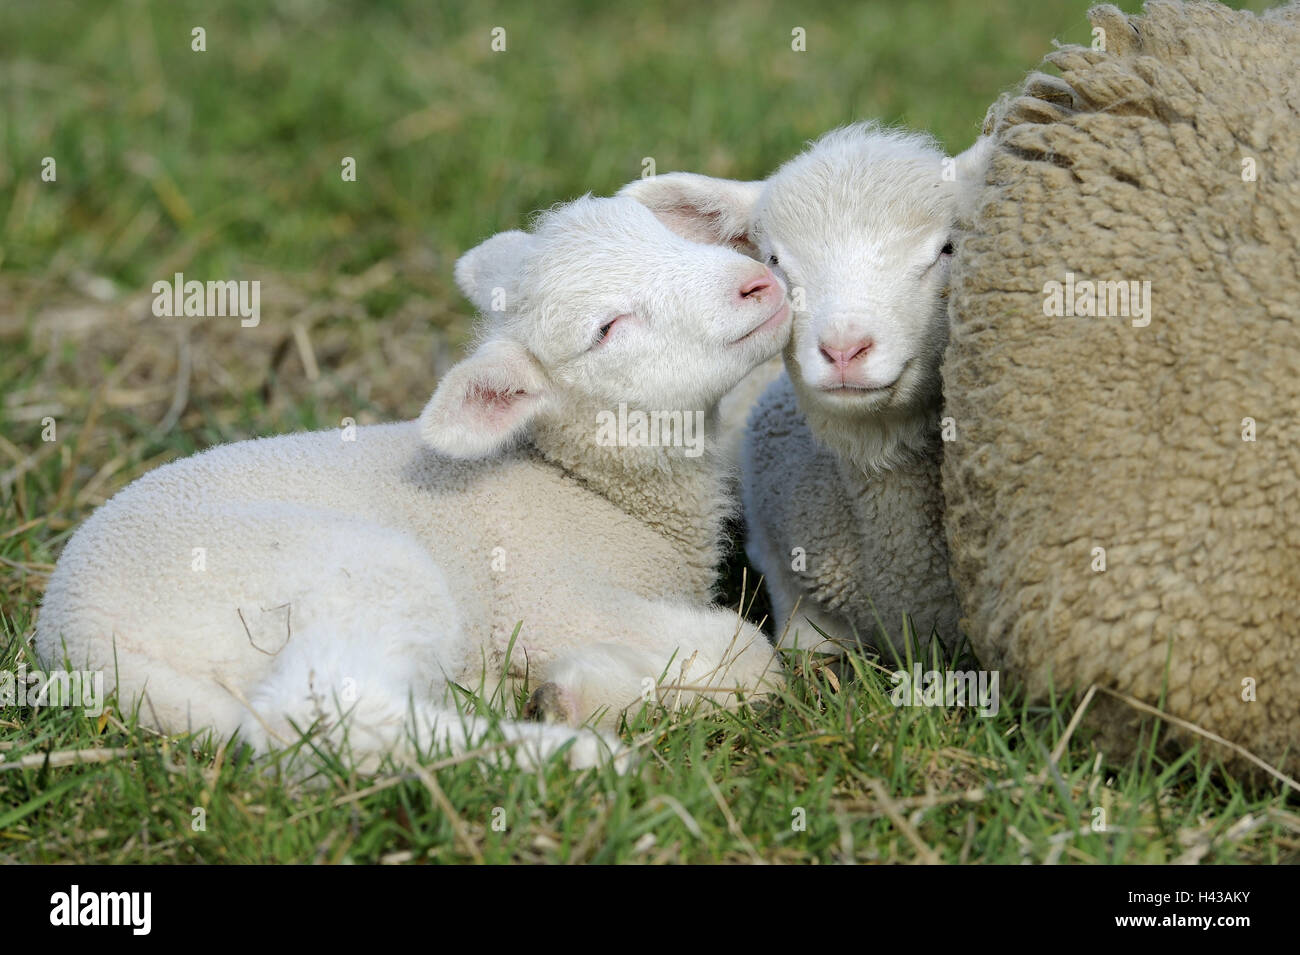 Meadow, merino sheep, mother animal, lambs, nestle up, lie, detail, animals,  mammals, benefit animals, sheep, Schafrasse, land sheep, merino, young  animals, pasture, outside, agriculture, cattle breeding, keeping pets,  suture, security, cuddle, instinct